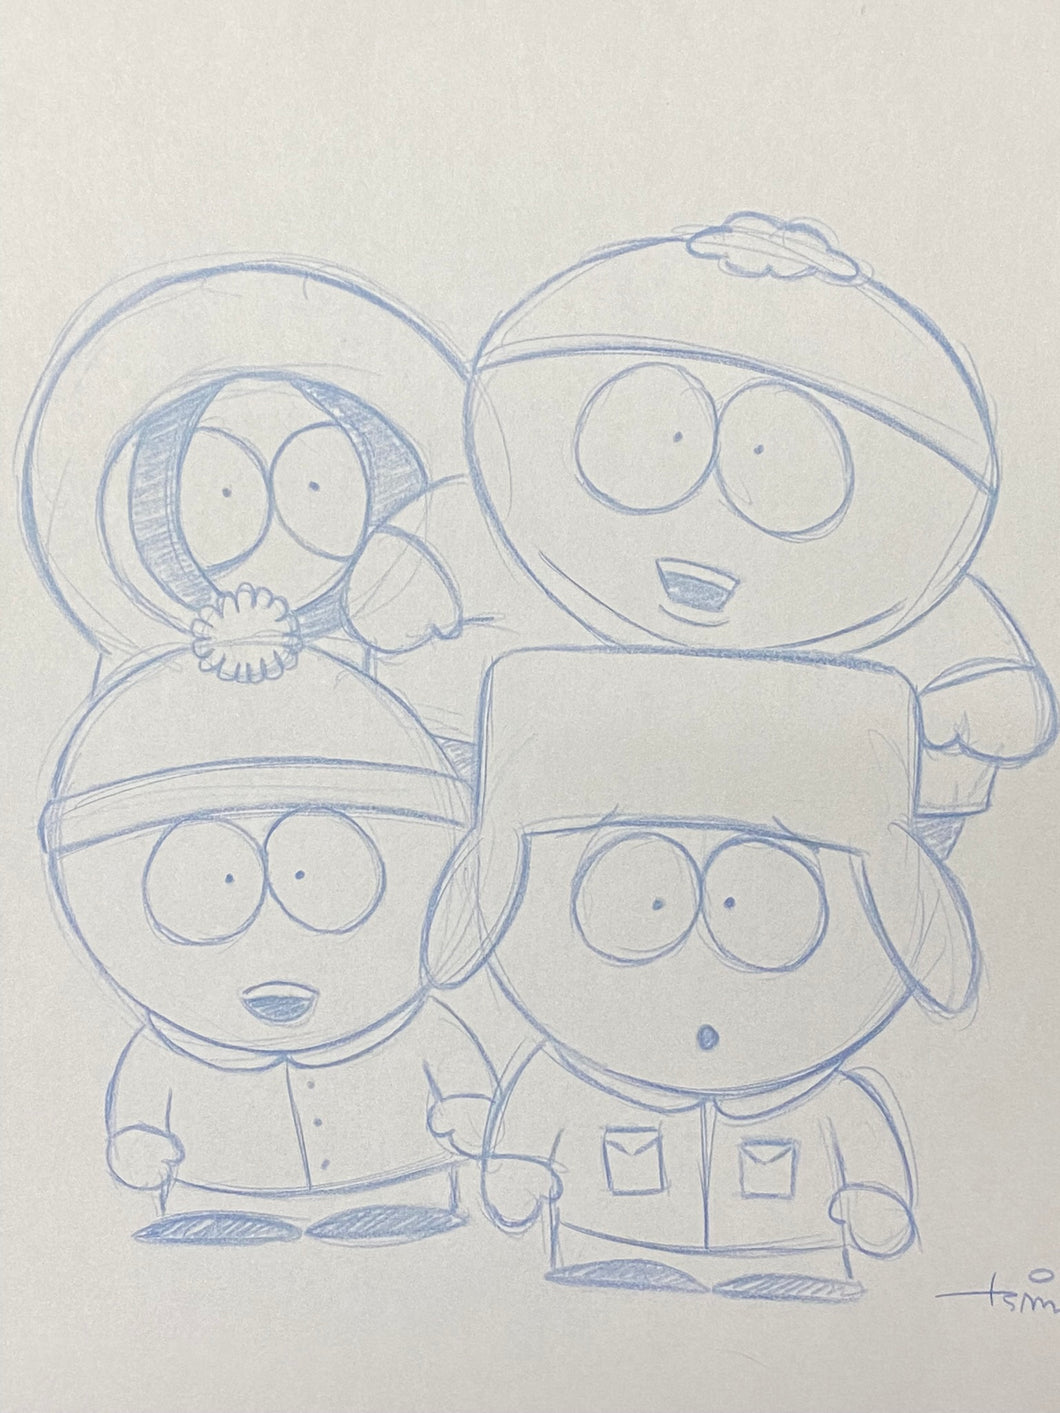 South Park - Lay Out drawing of the characters, made by Todd Aaron Smith (certificated)